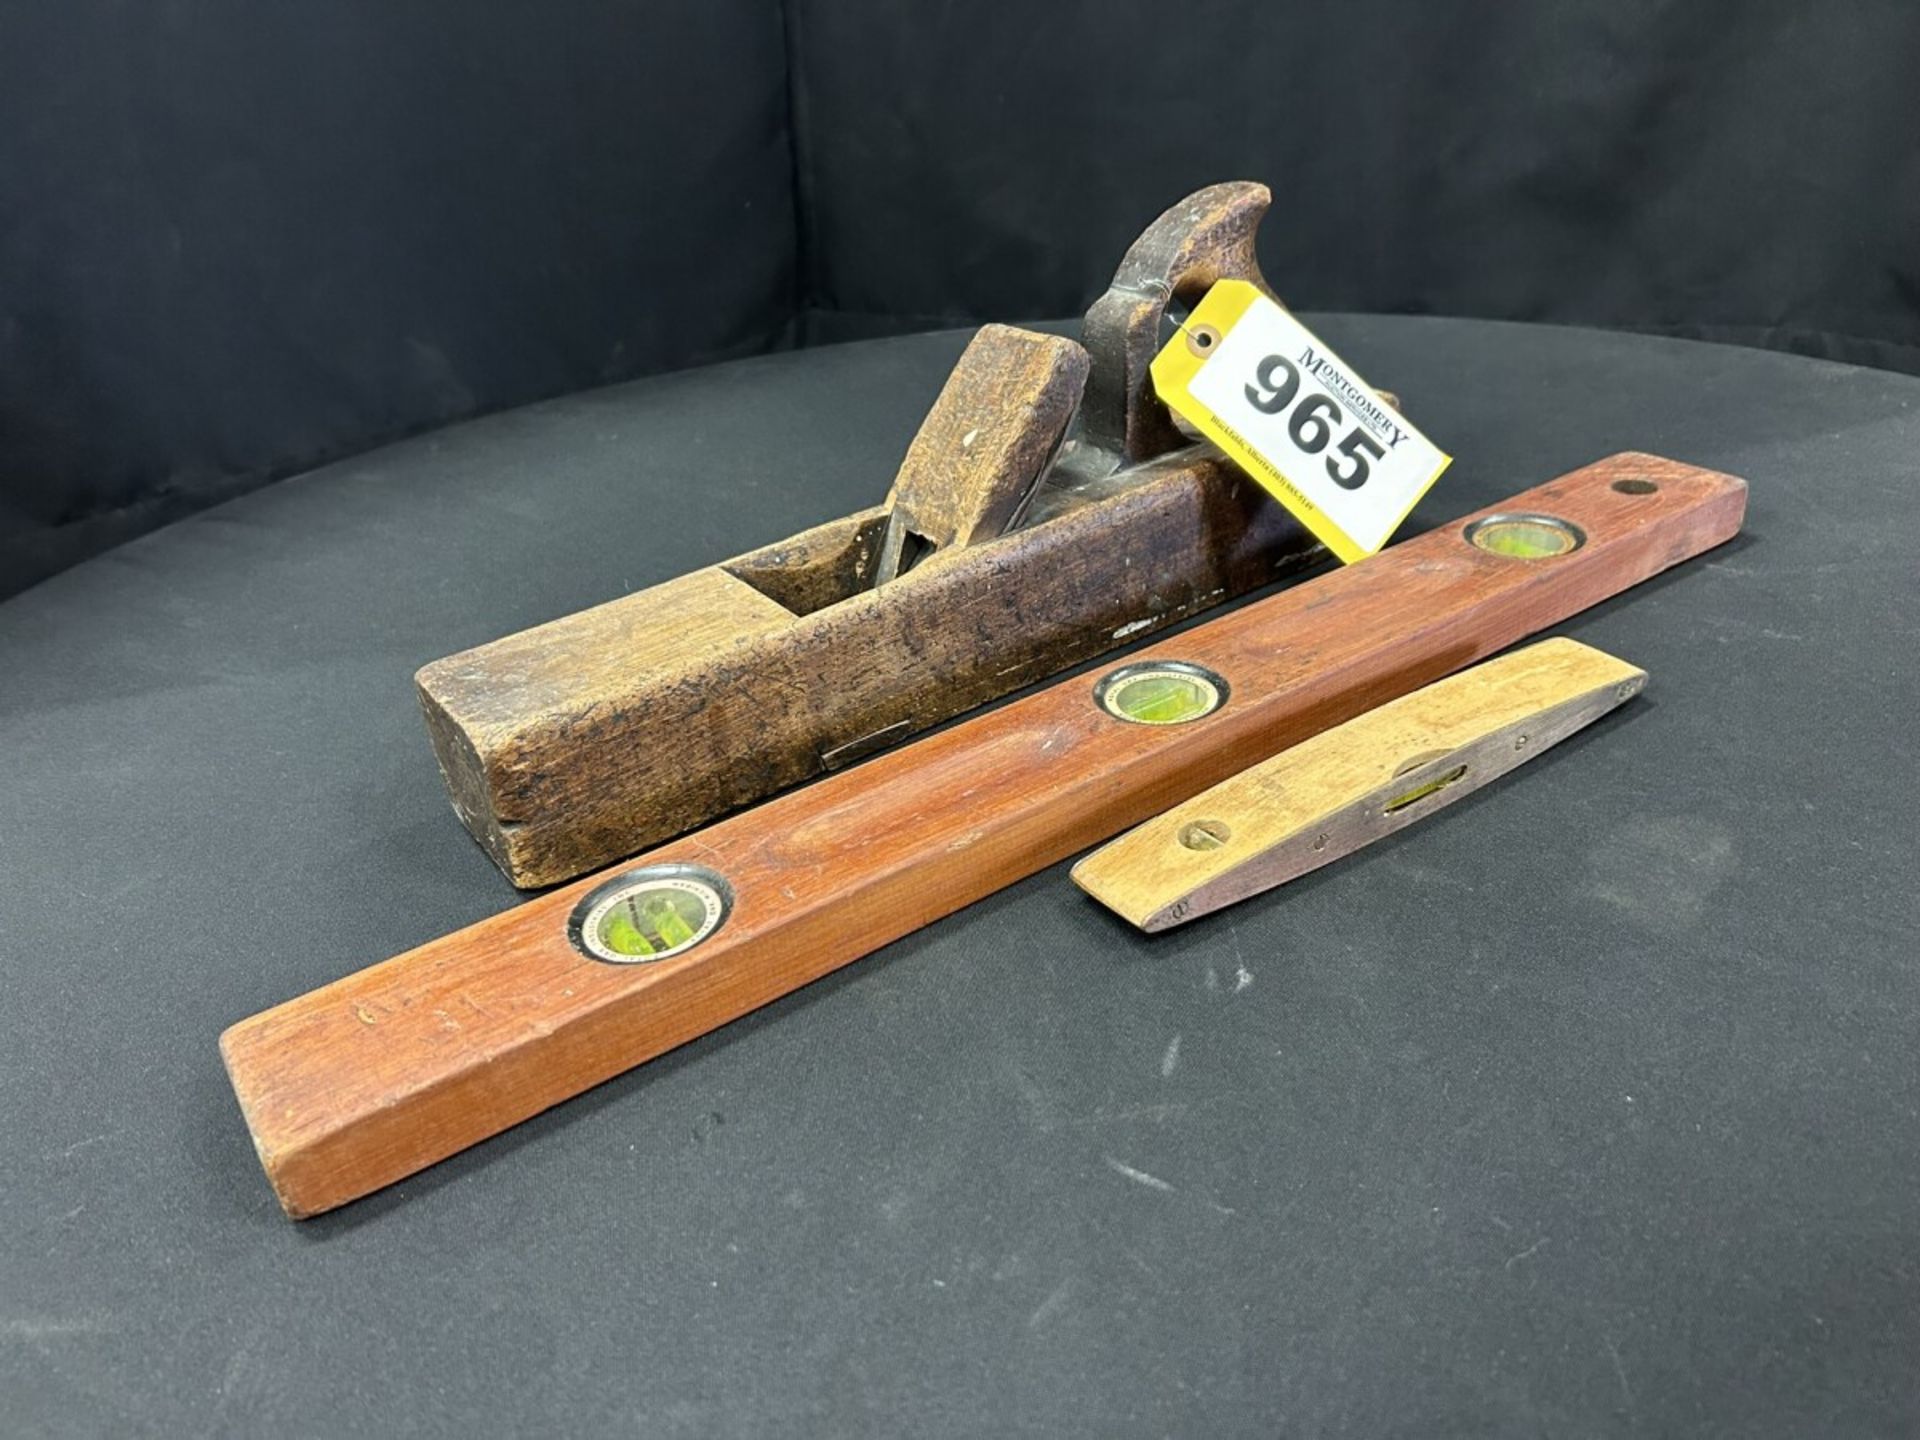 ANTIQUE WOODEN BLOCK PLANE AND WOODEN CARPENTERS LEVELS